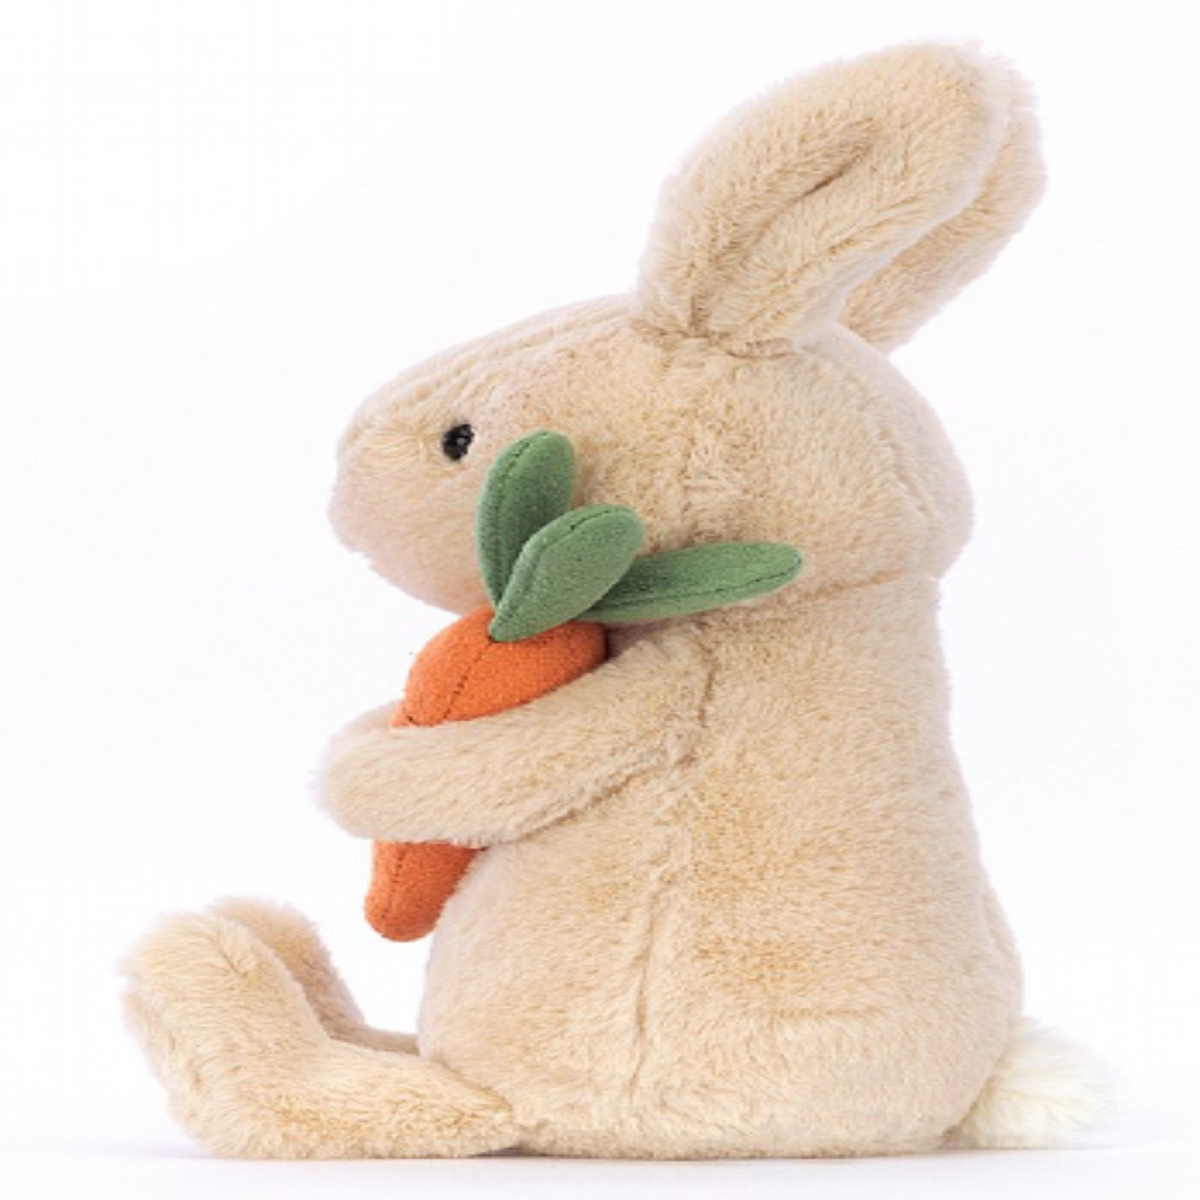 Bonnie Bunny With Carrot